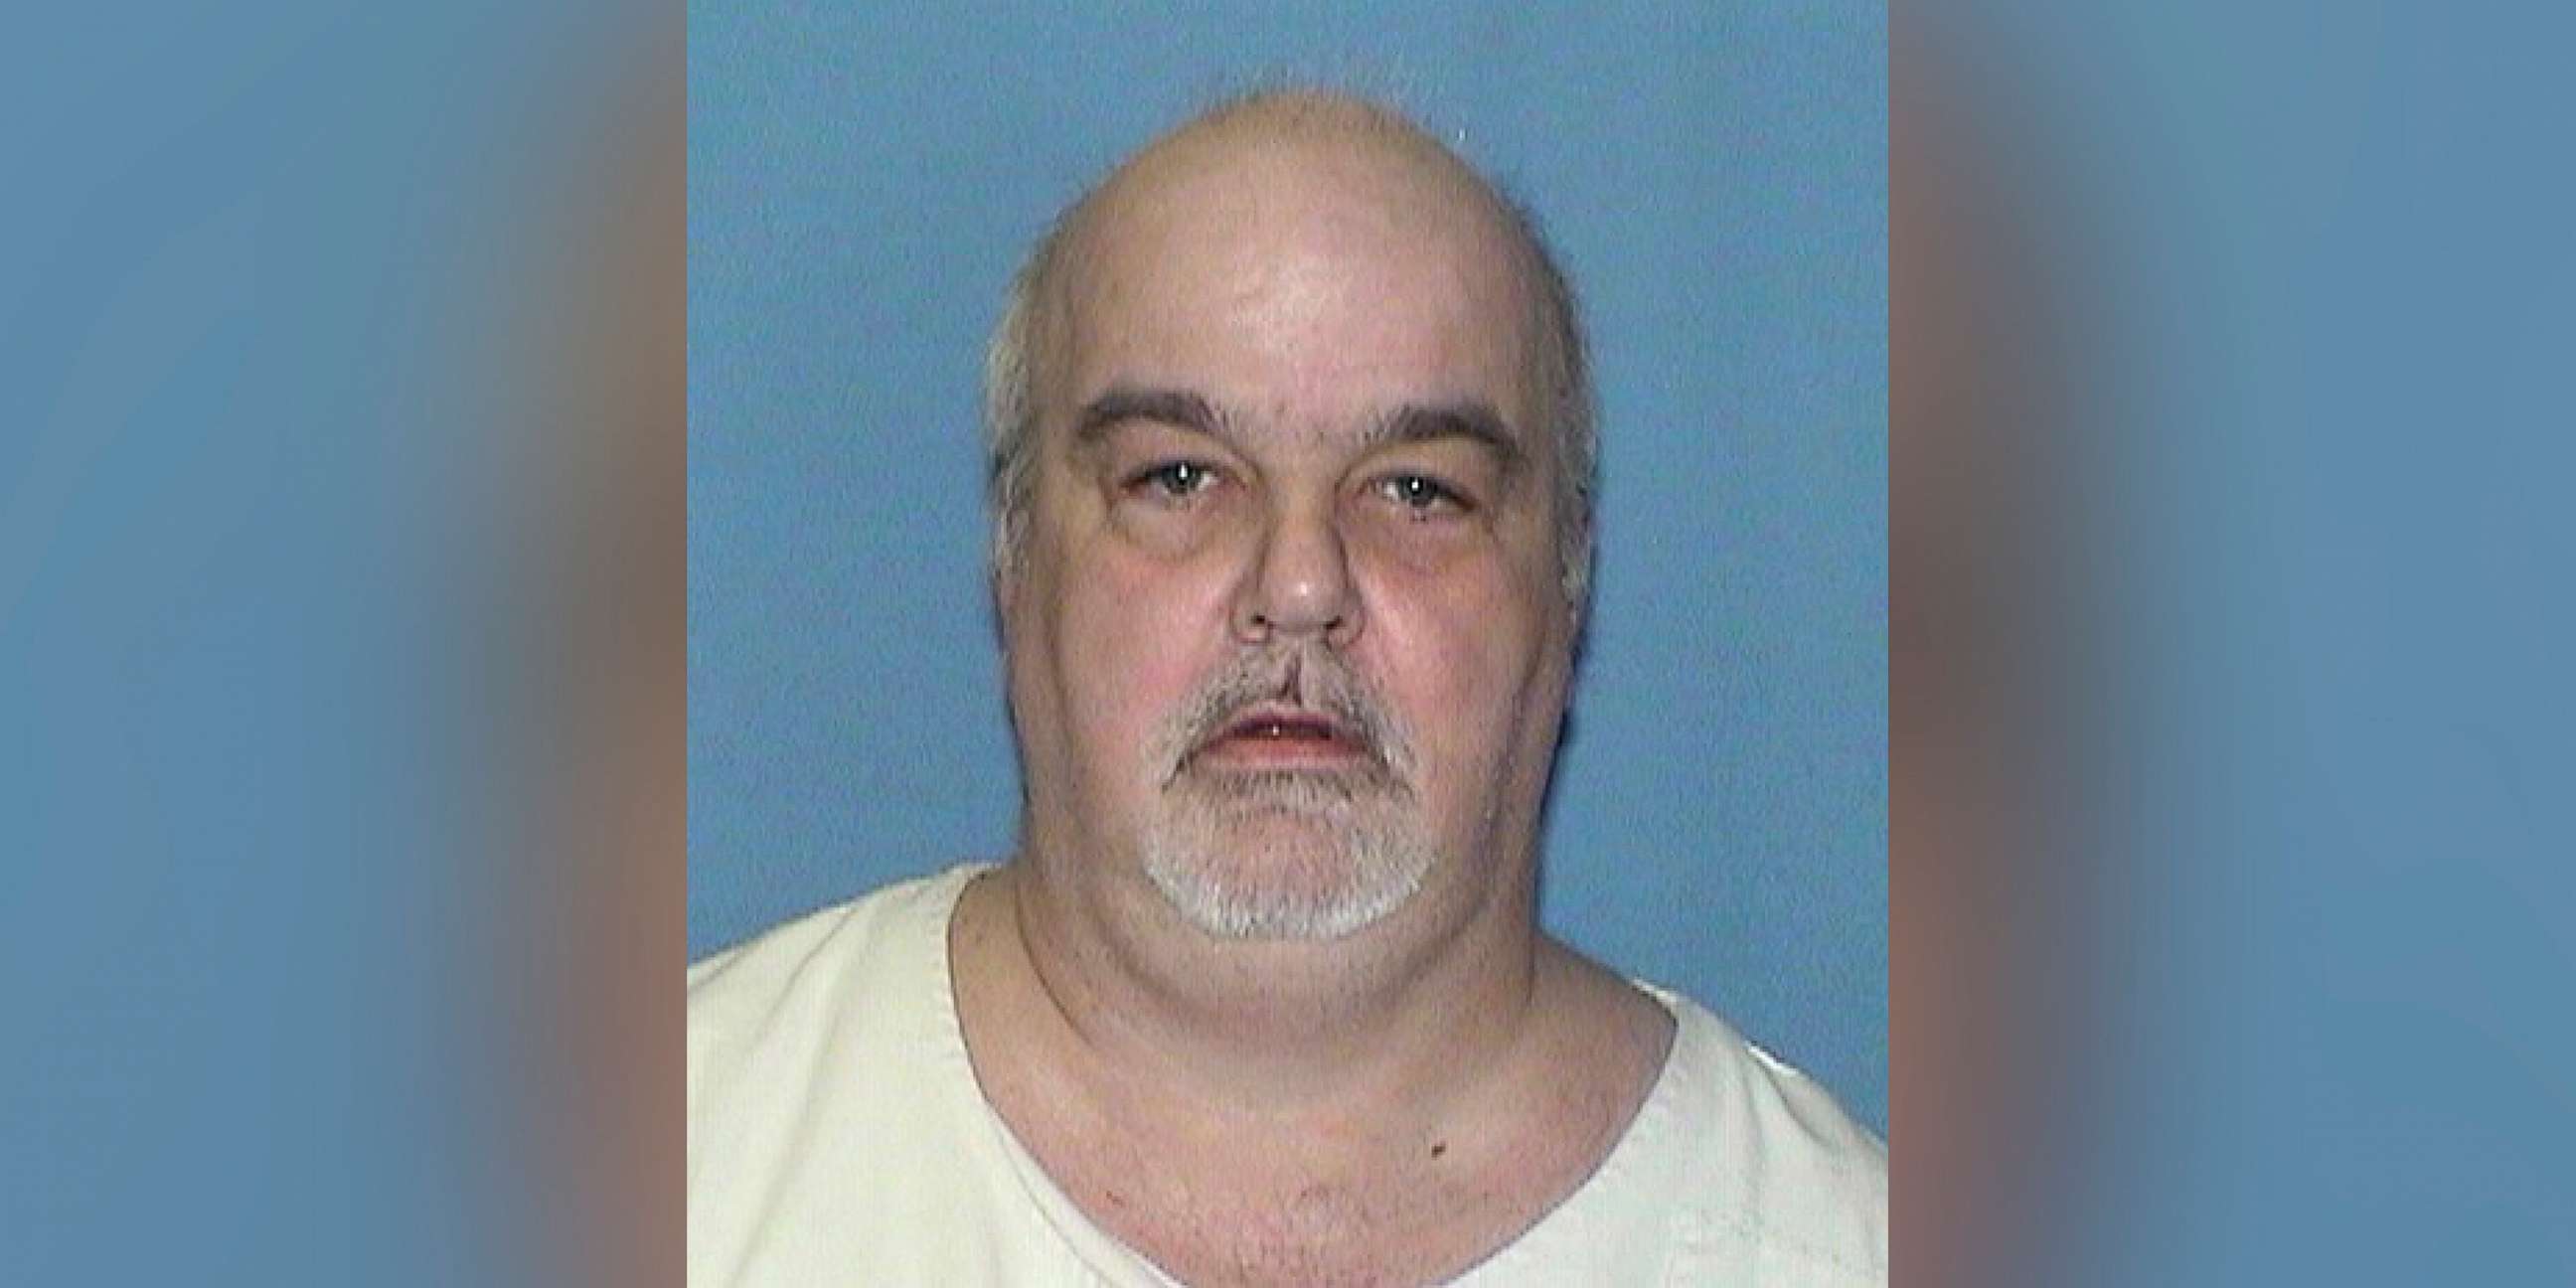 PHOTO: Thomas Kokoraleis, the convicted murderer who is suspected of being a member of the notorious "Ripper Crew" that brutally killed as many as 20 women in the 1980s is scheduled to be released on Friday, March 29, 2019.